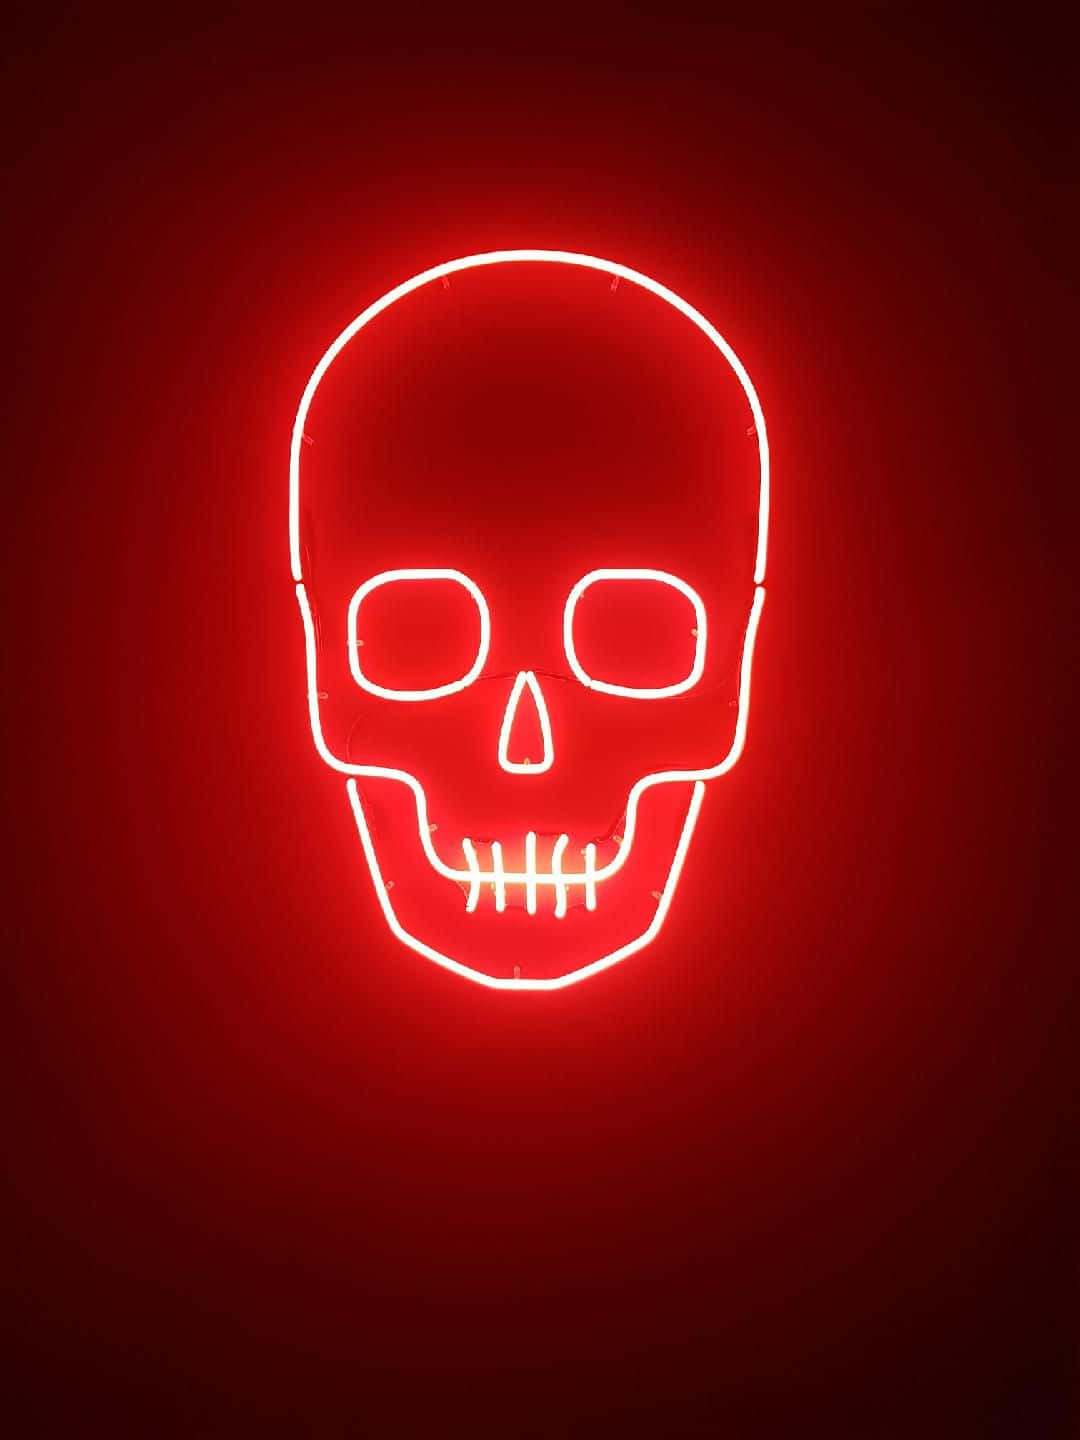 Top 999+ Red Iphone Wallpaper Full HD, 4K✓Free to Use